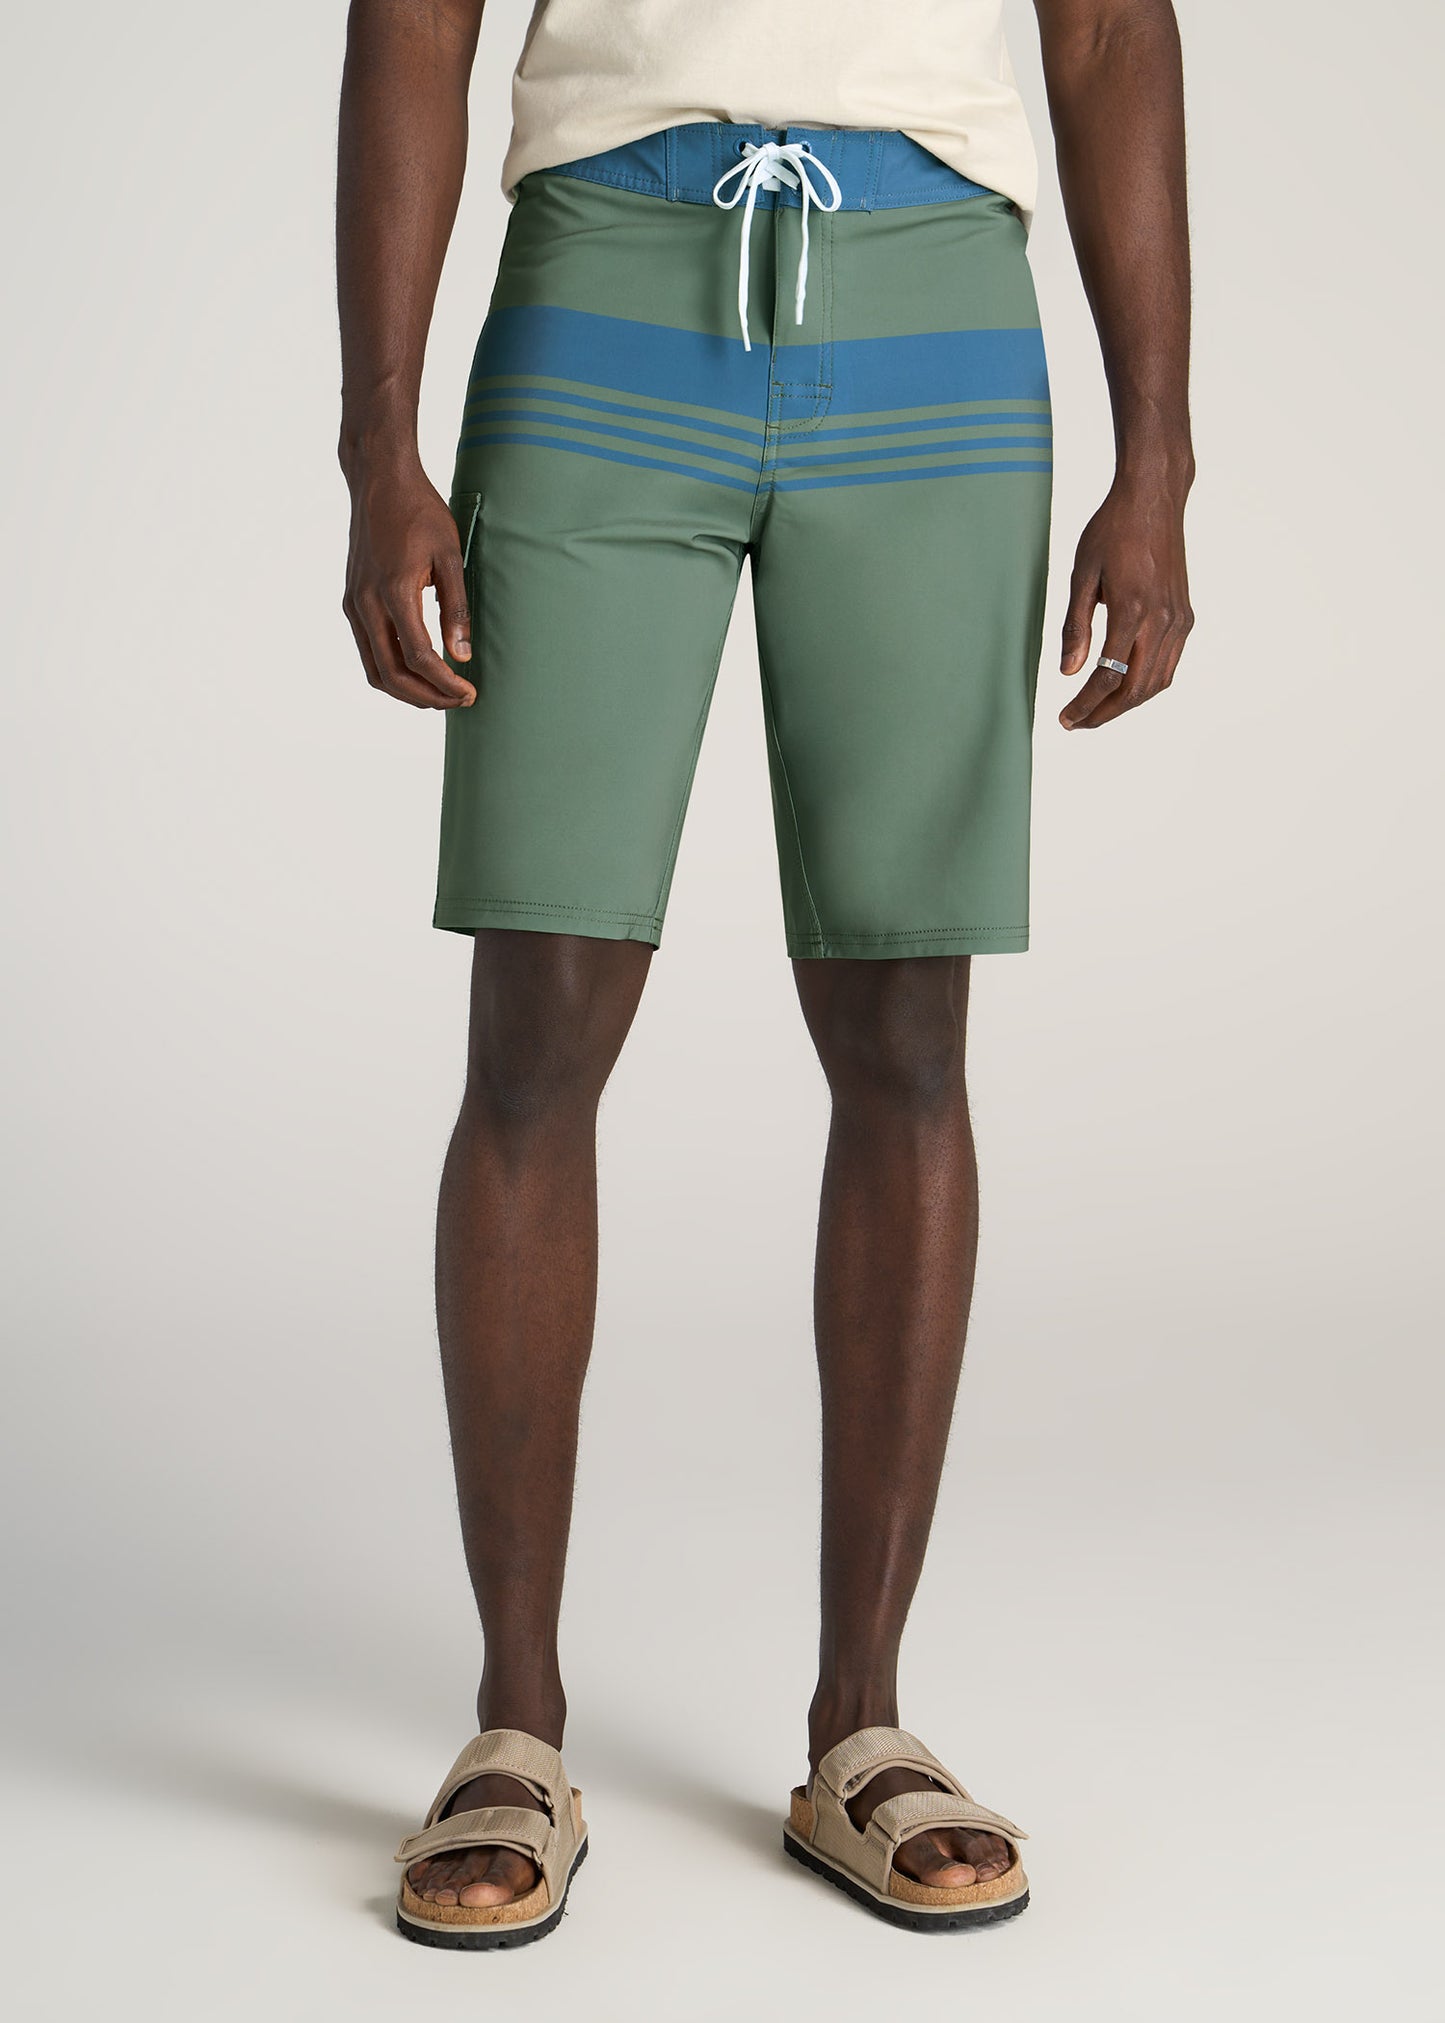    American-Tall-Men-Board-Shorts-Olive-Navy-Stripe-front